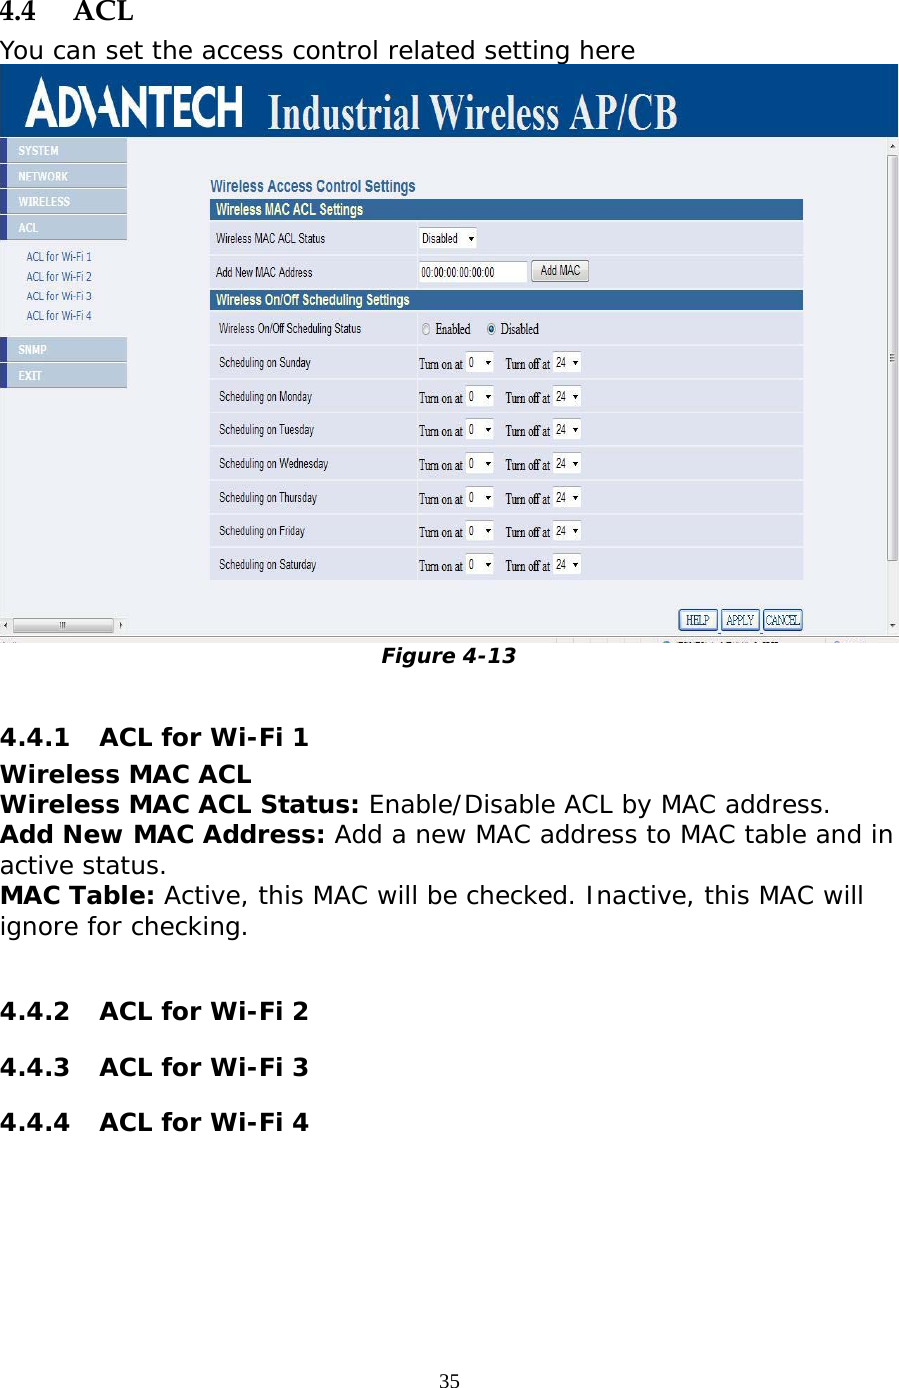                   4.4 ACL You can set the access control related setting here  Figure 4-13  4.4.1  ACL for Wi-Fi 1 Wireless MAC ACL Wireless MAC ACL Status: Enable/Disable ACL by MAC address. Add New MAC Address: Add a new MAC address to MAC table and in active status.  MAC Table: Active, this MAC will be checked. Inactive, this MAC will ignore for checking.   4.4.2  ACL for Wi-Fi 2 4.4.3  ACL for Wi-Fi 3 4.4.4  ACL for Wi-Fi 4  35 